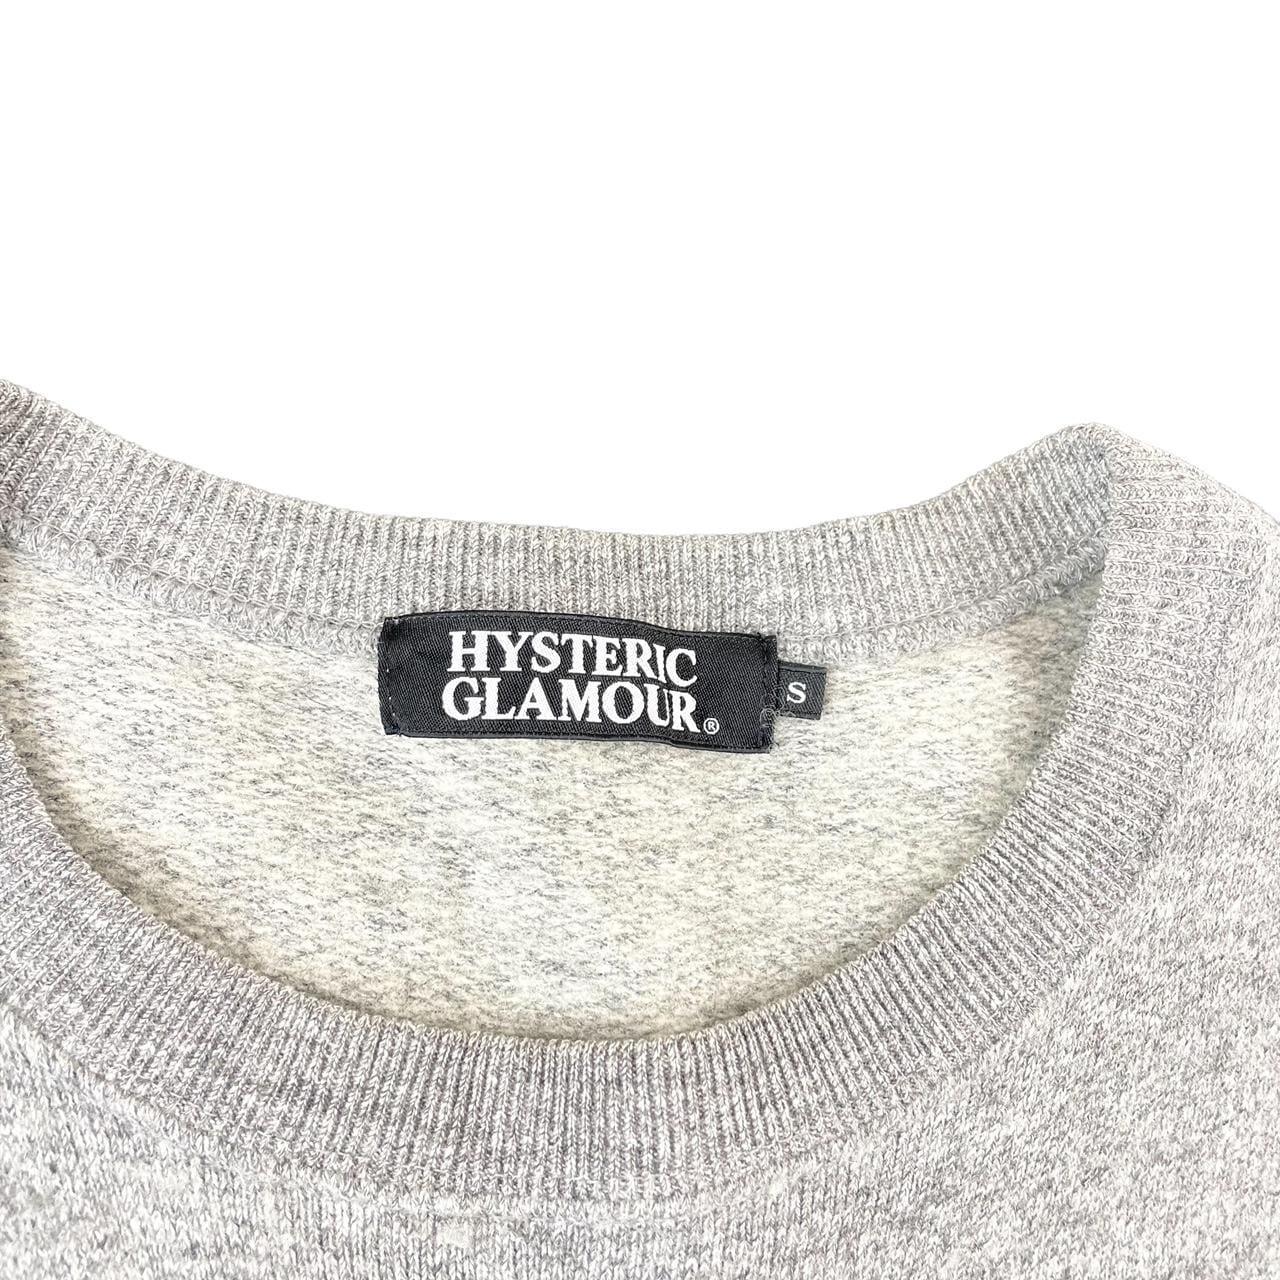 Vintage Hysteric Glamour ice cream jumper size S - Known Source